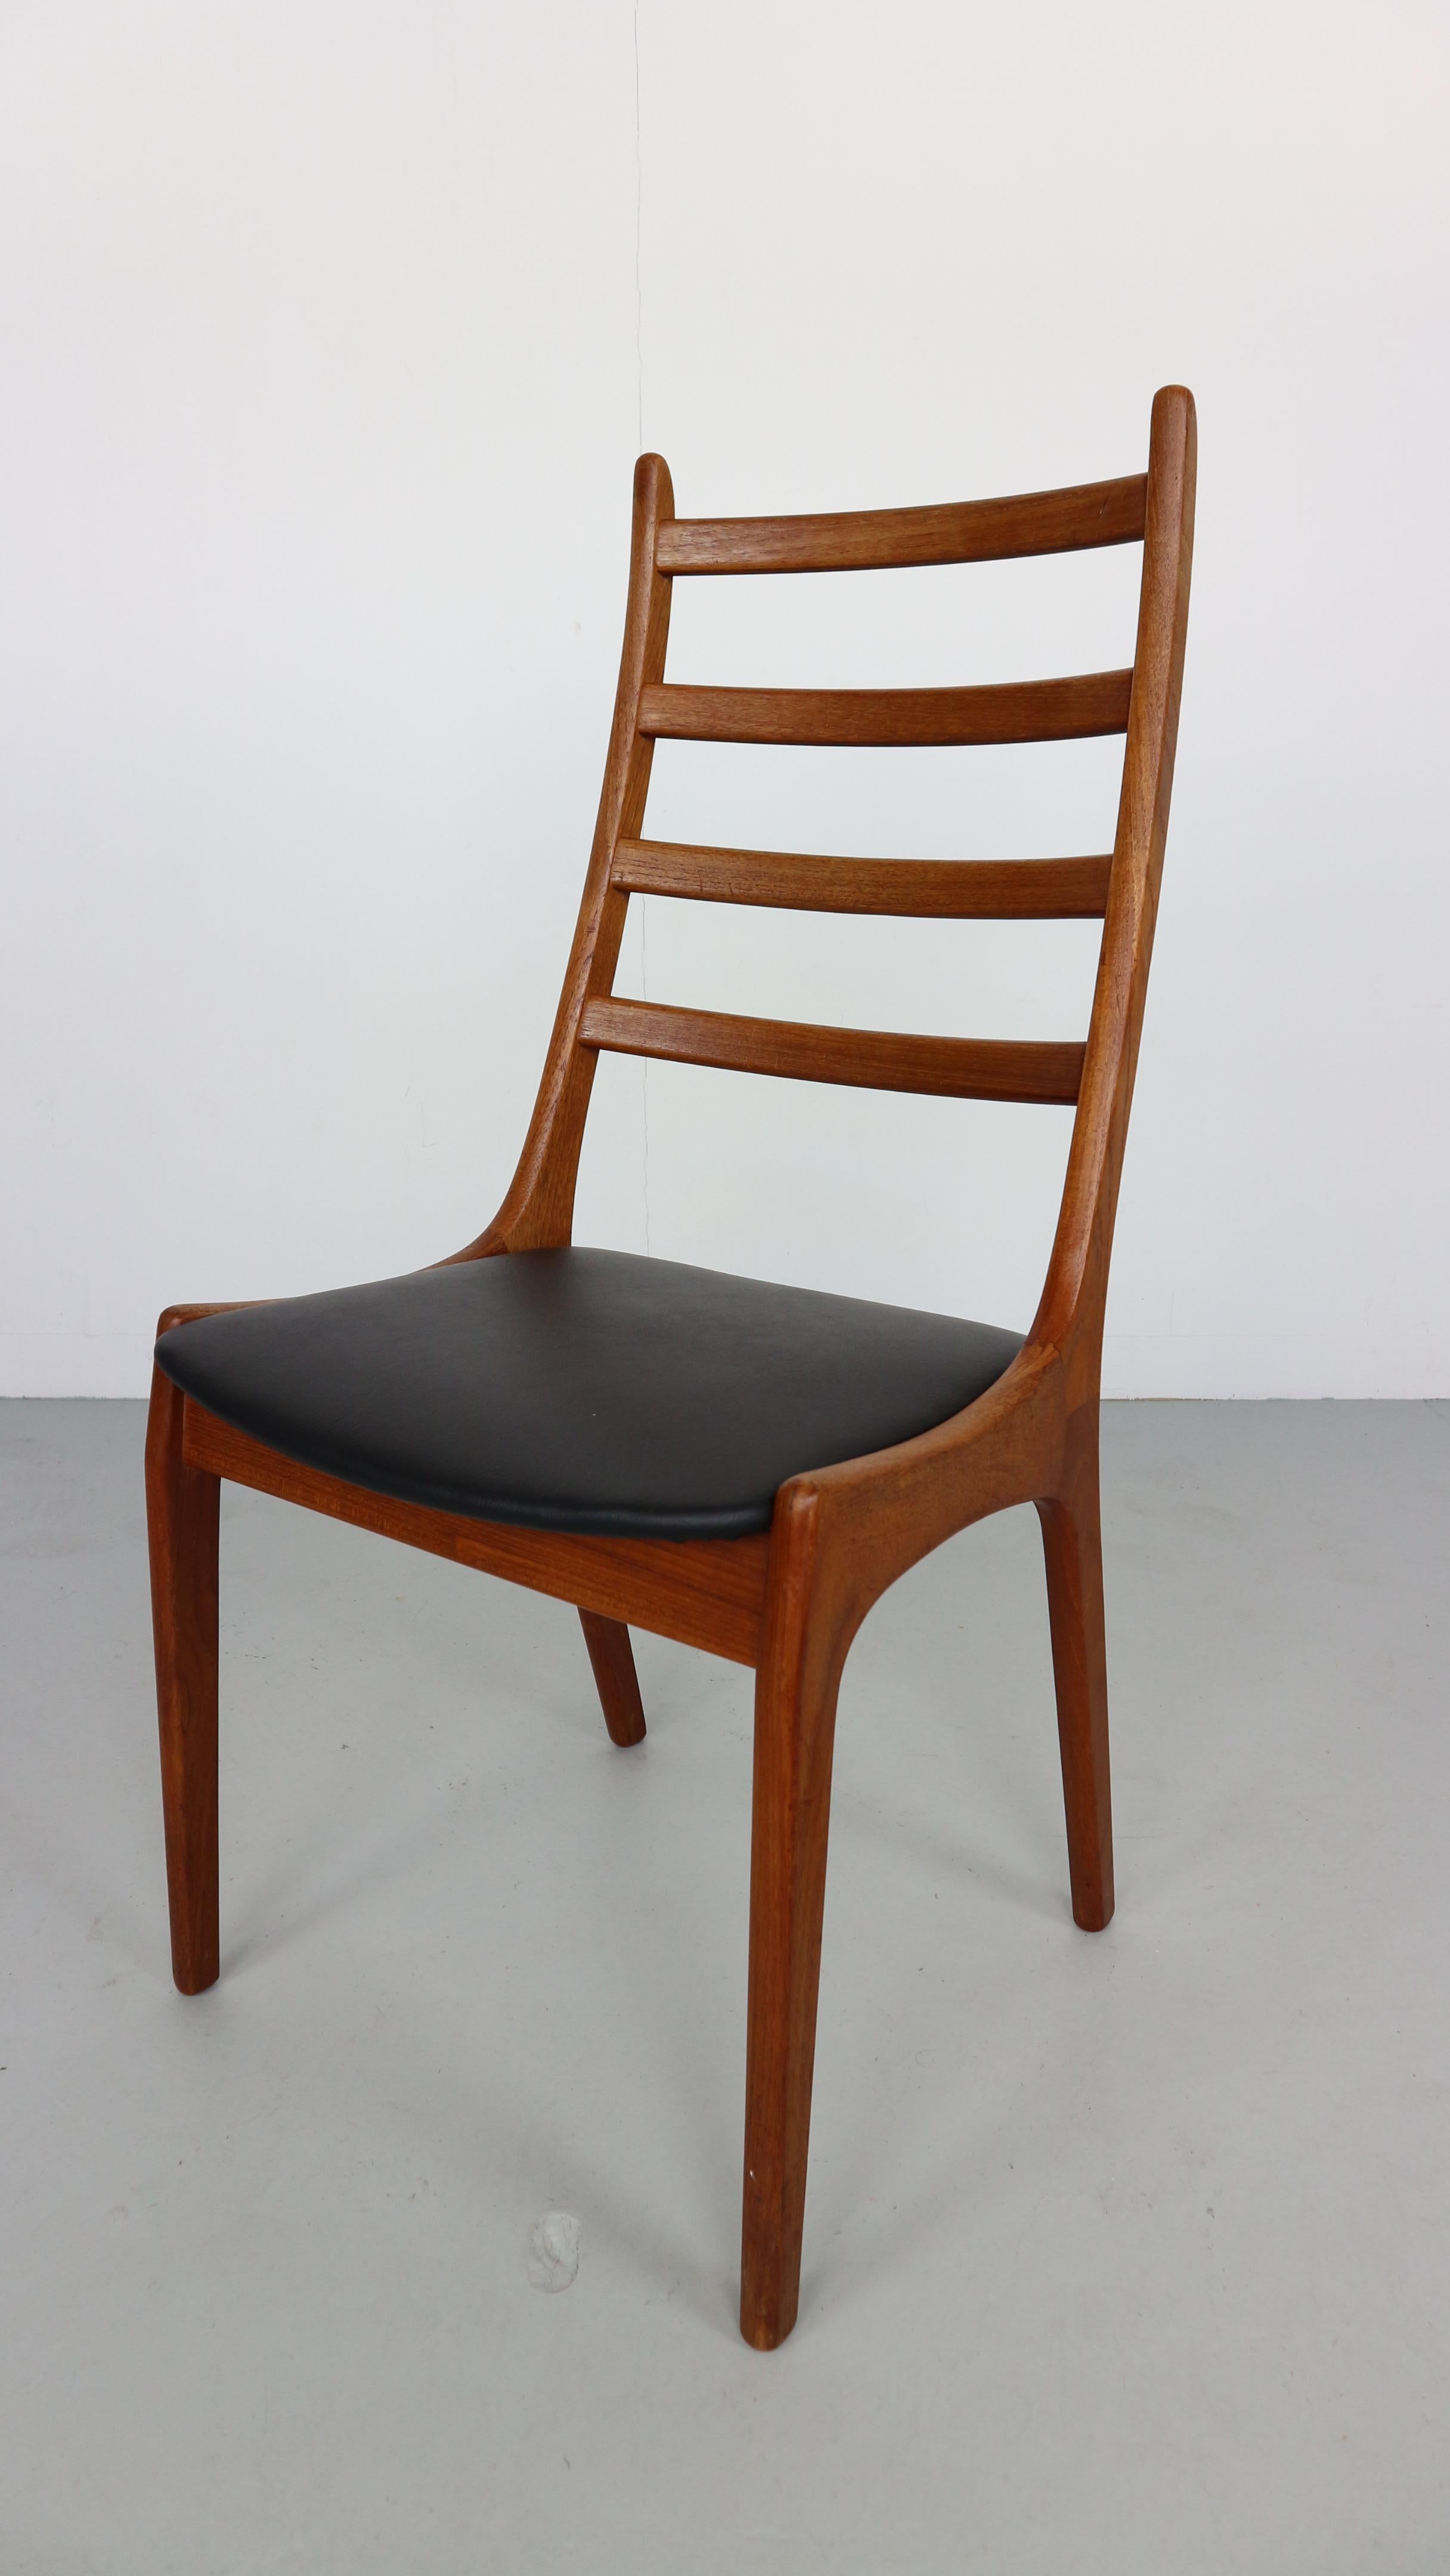 These stunning midcentury dining chairs were crafted by high end Danish maker Korup Stolefabrik. Subtle features such as the finger grip joints are a great design feature and a tribute to the quality of construction. Seats are newly upholstered in